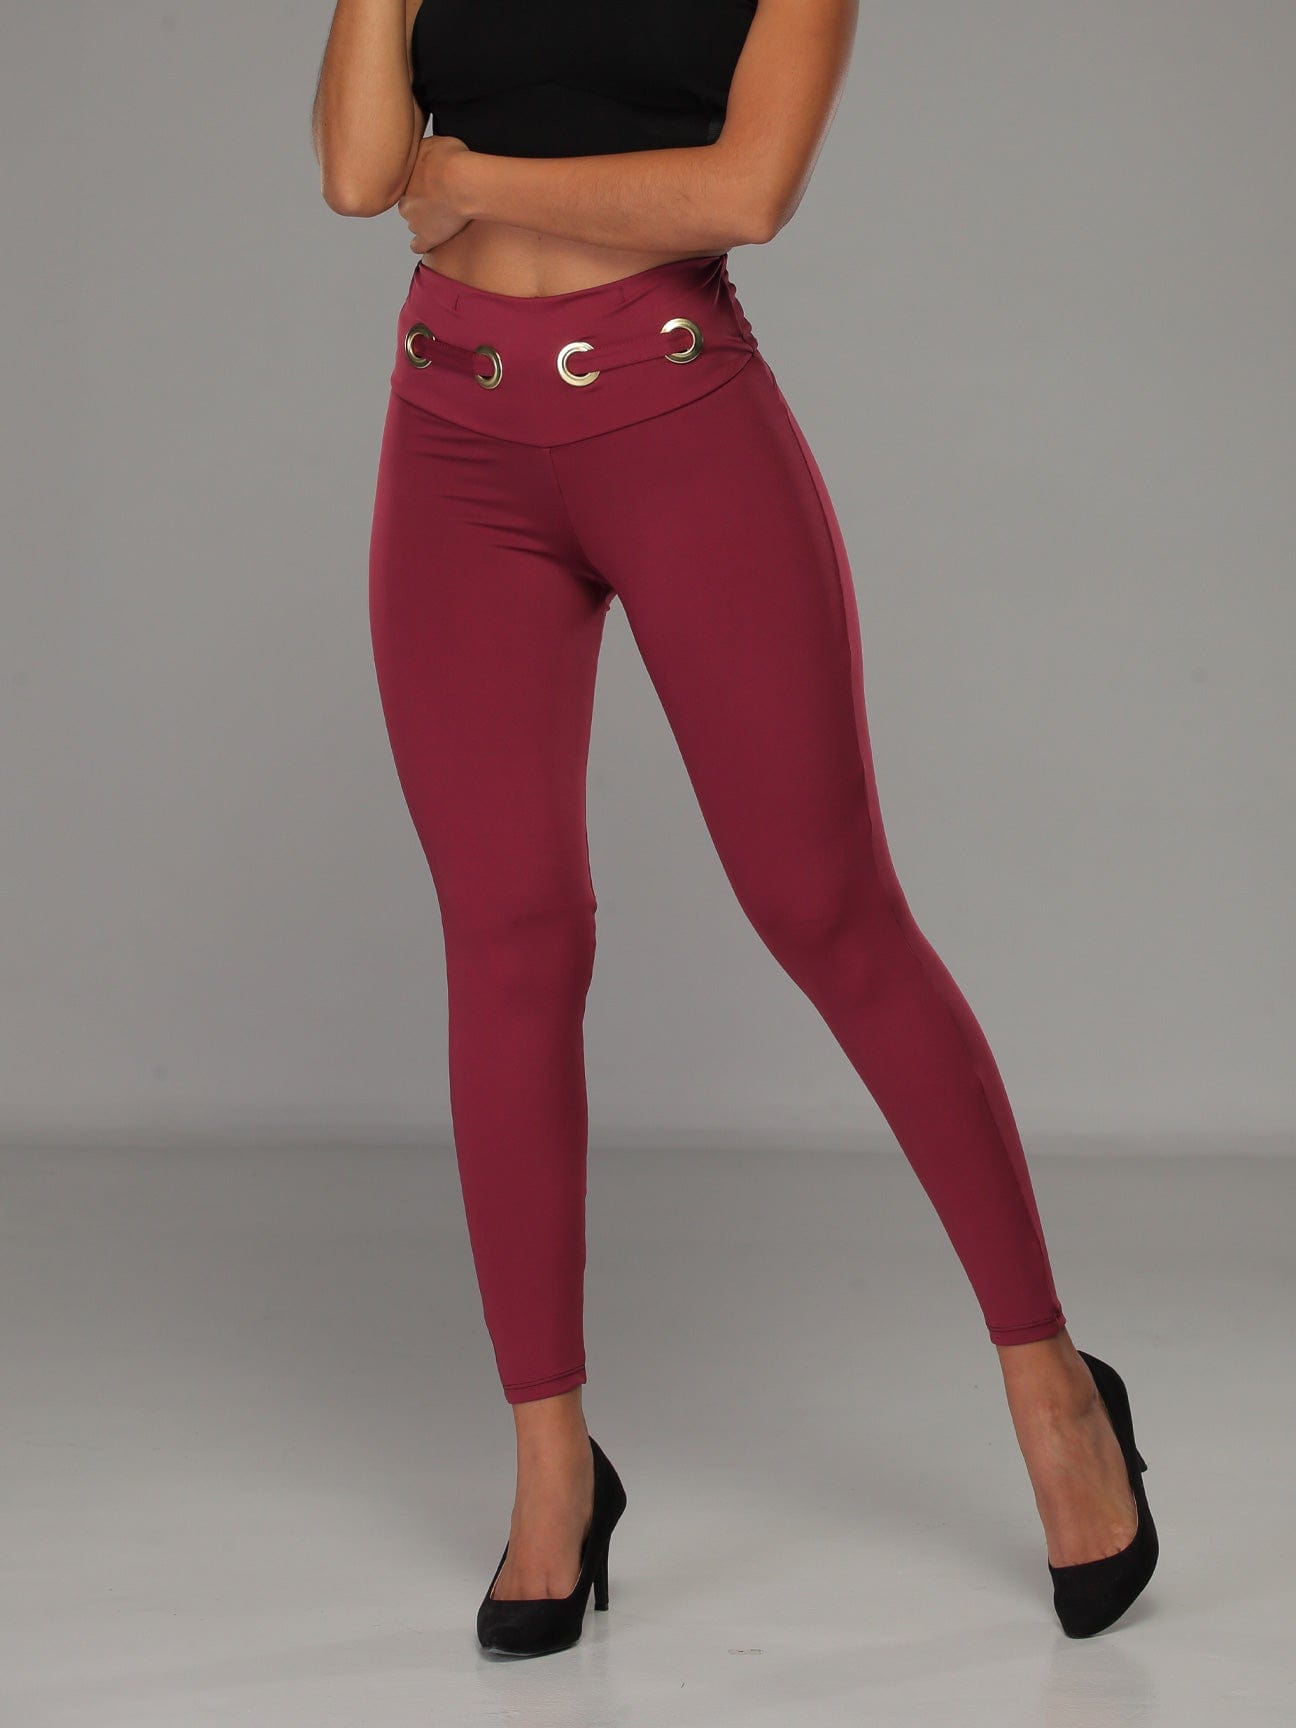 Ruby Butt Lift Leggings with Tummy Control 1280